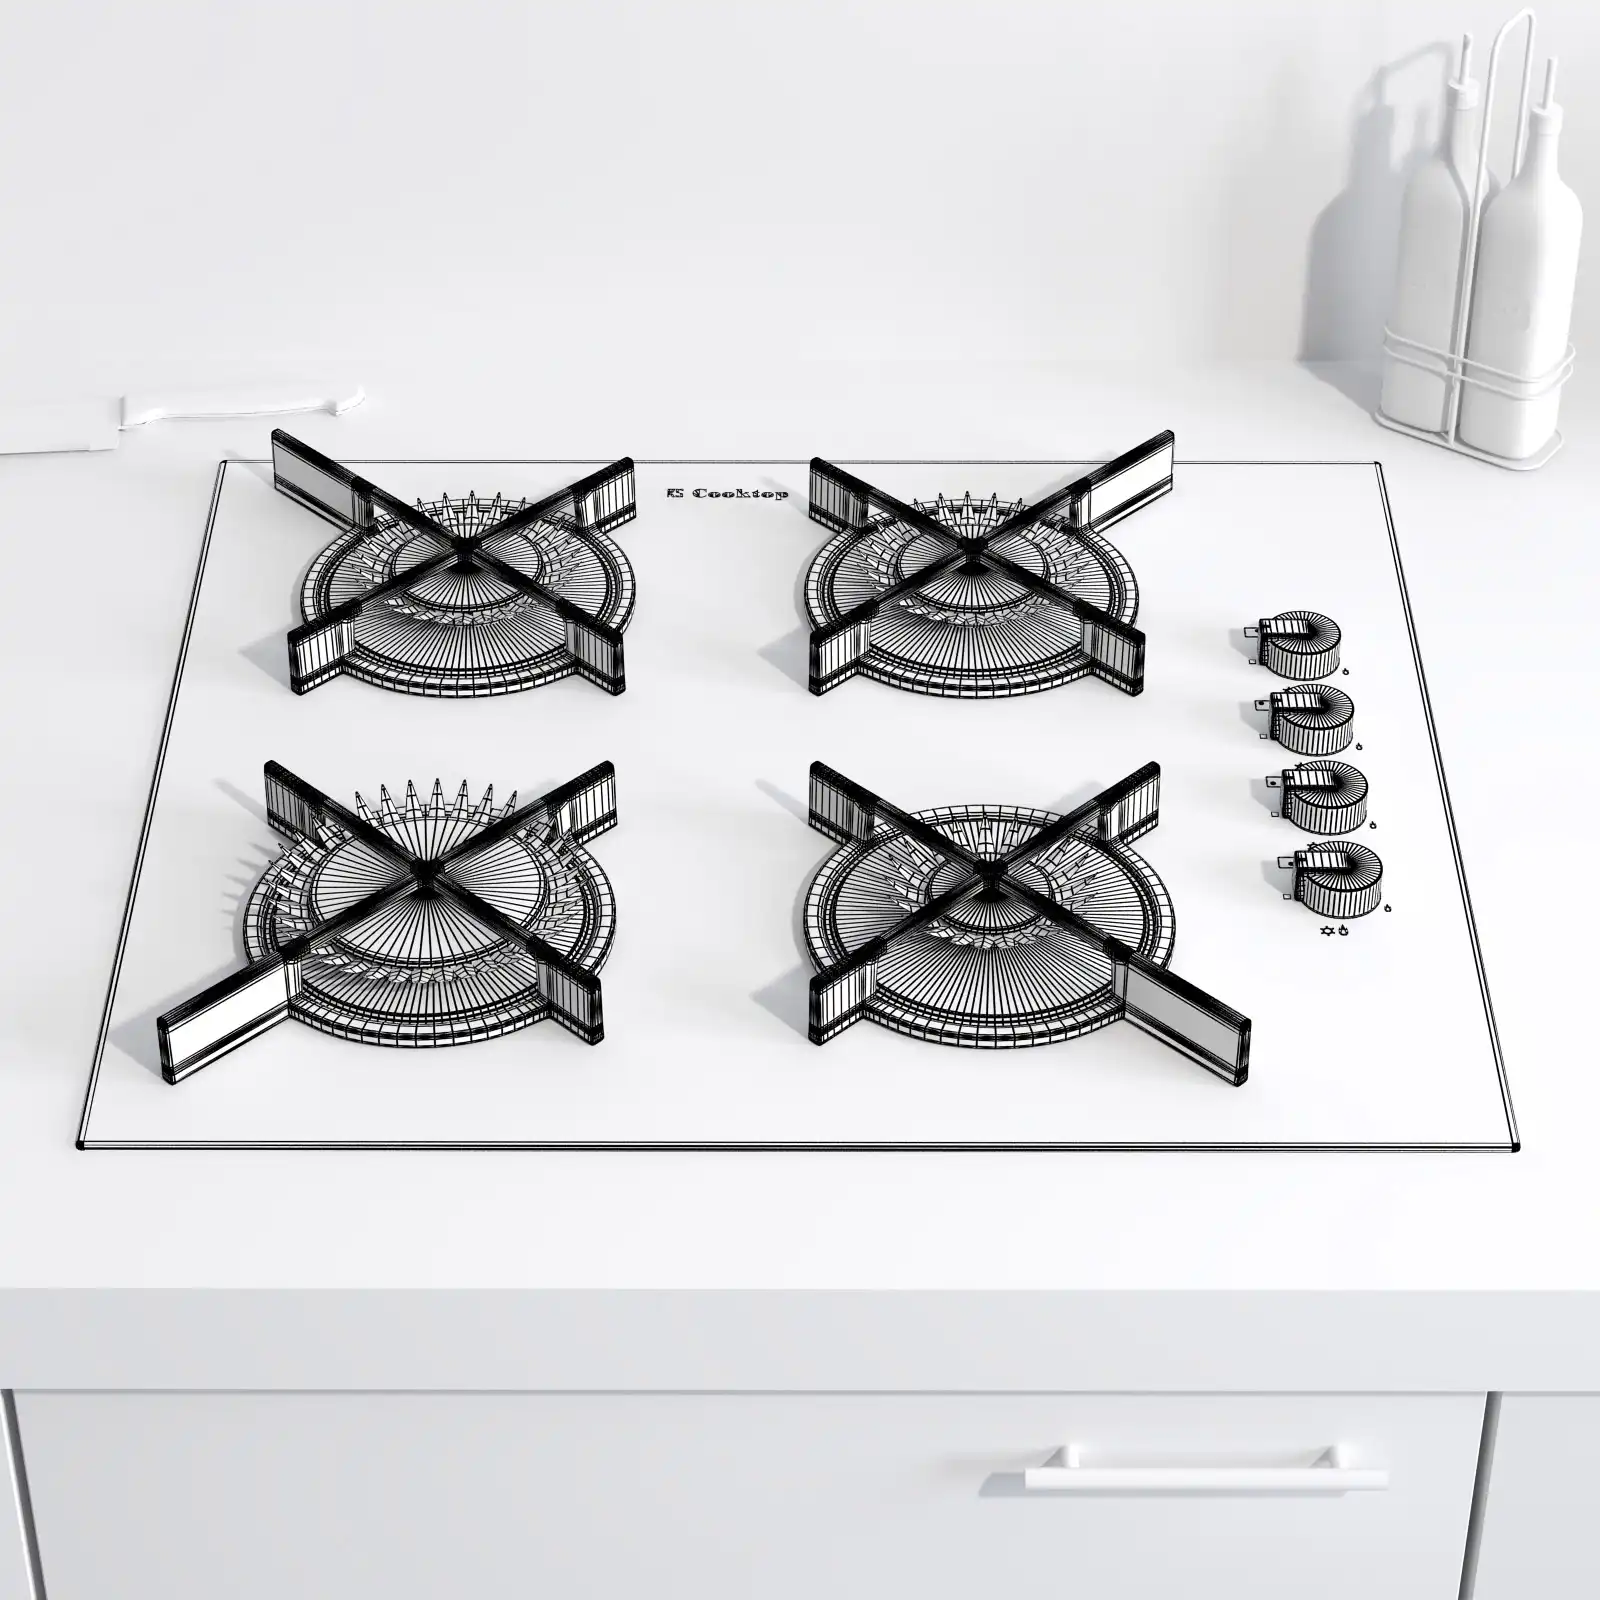 Wireframe rendering of a 3d model of a white gas stove in the interior.